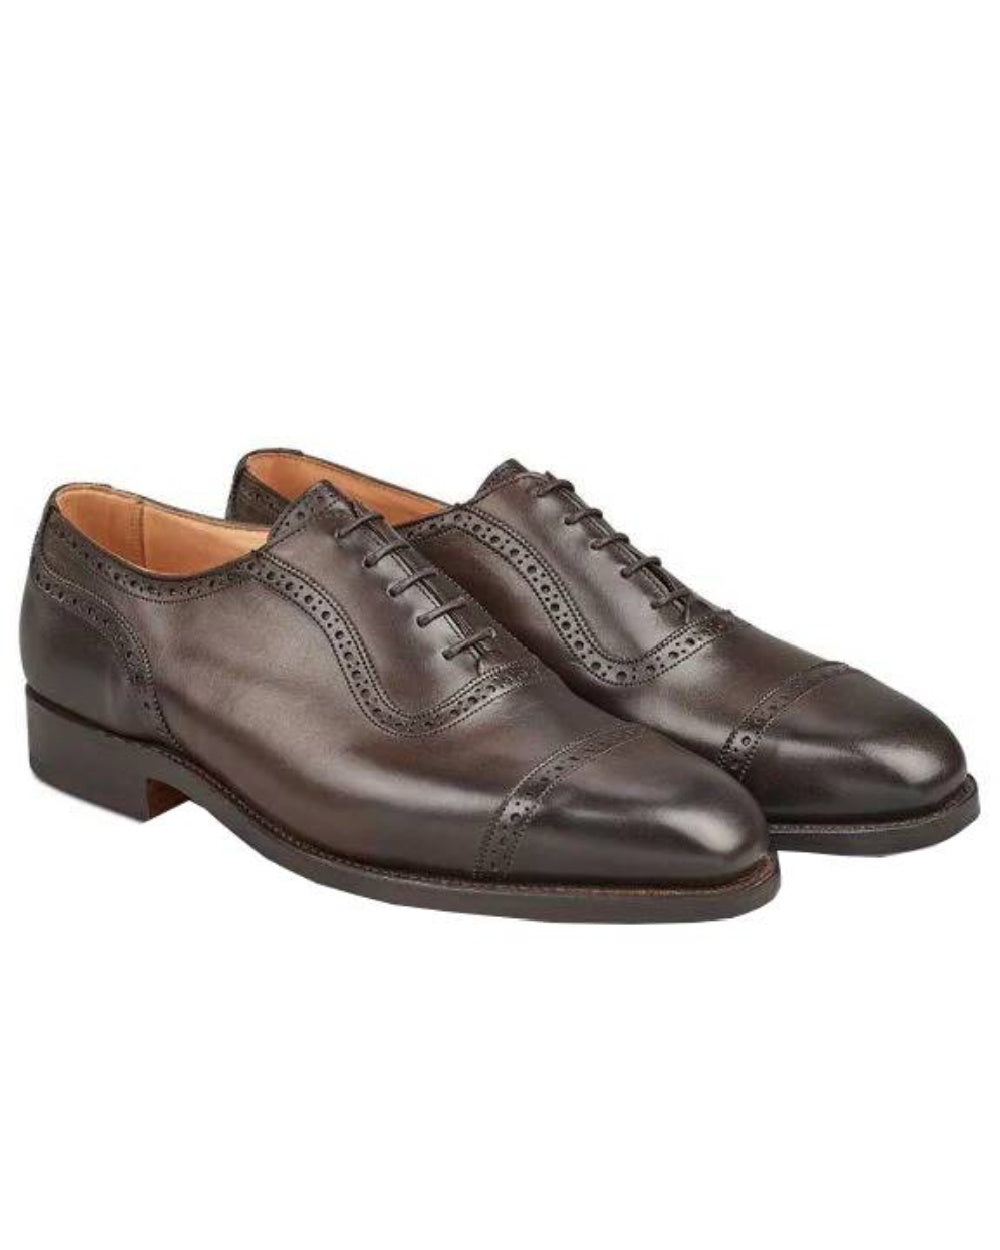 Espresso Burnished Coloured Trickers Belgrave Toecap Oxford City Shoe On A White Background 